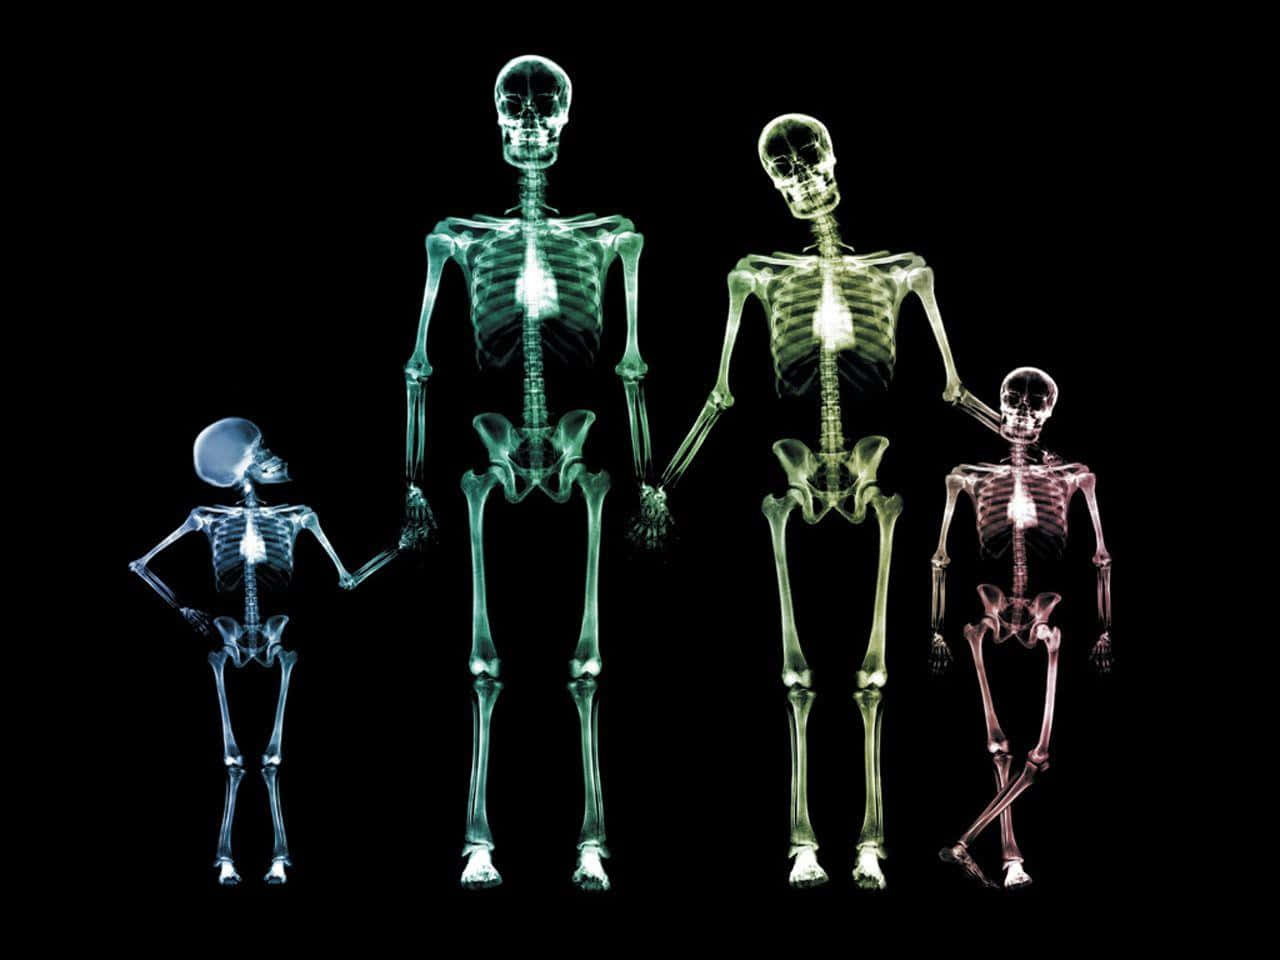 Skeletons Of A Family Standing On A Black Background